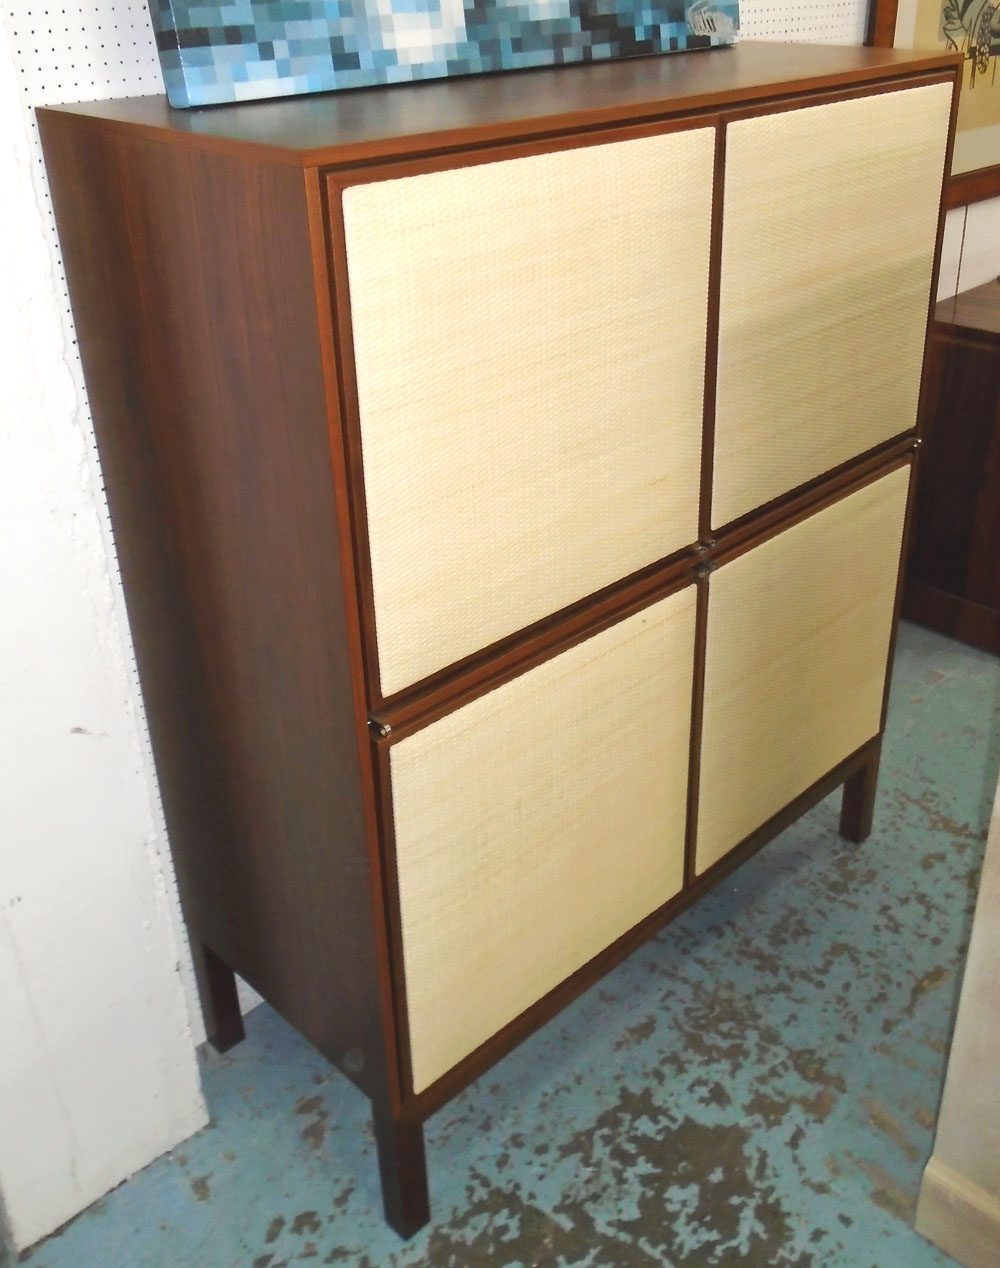 SIDE CABINET, Italian, with woven finish doors, 150cm W x 141cm H x 50cm D.